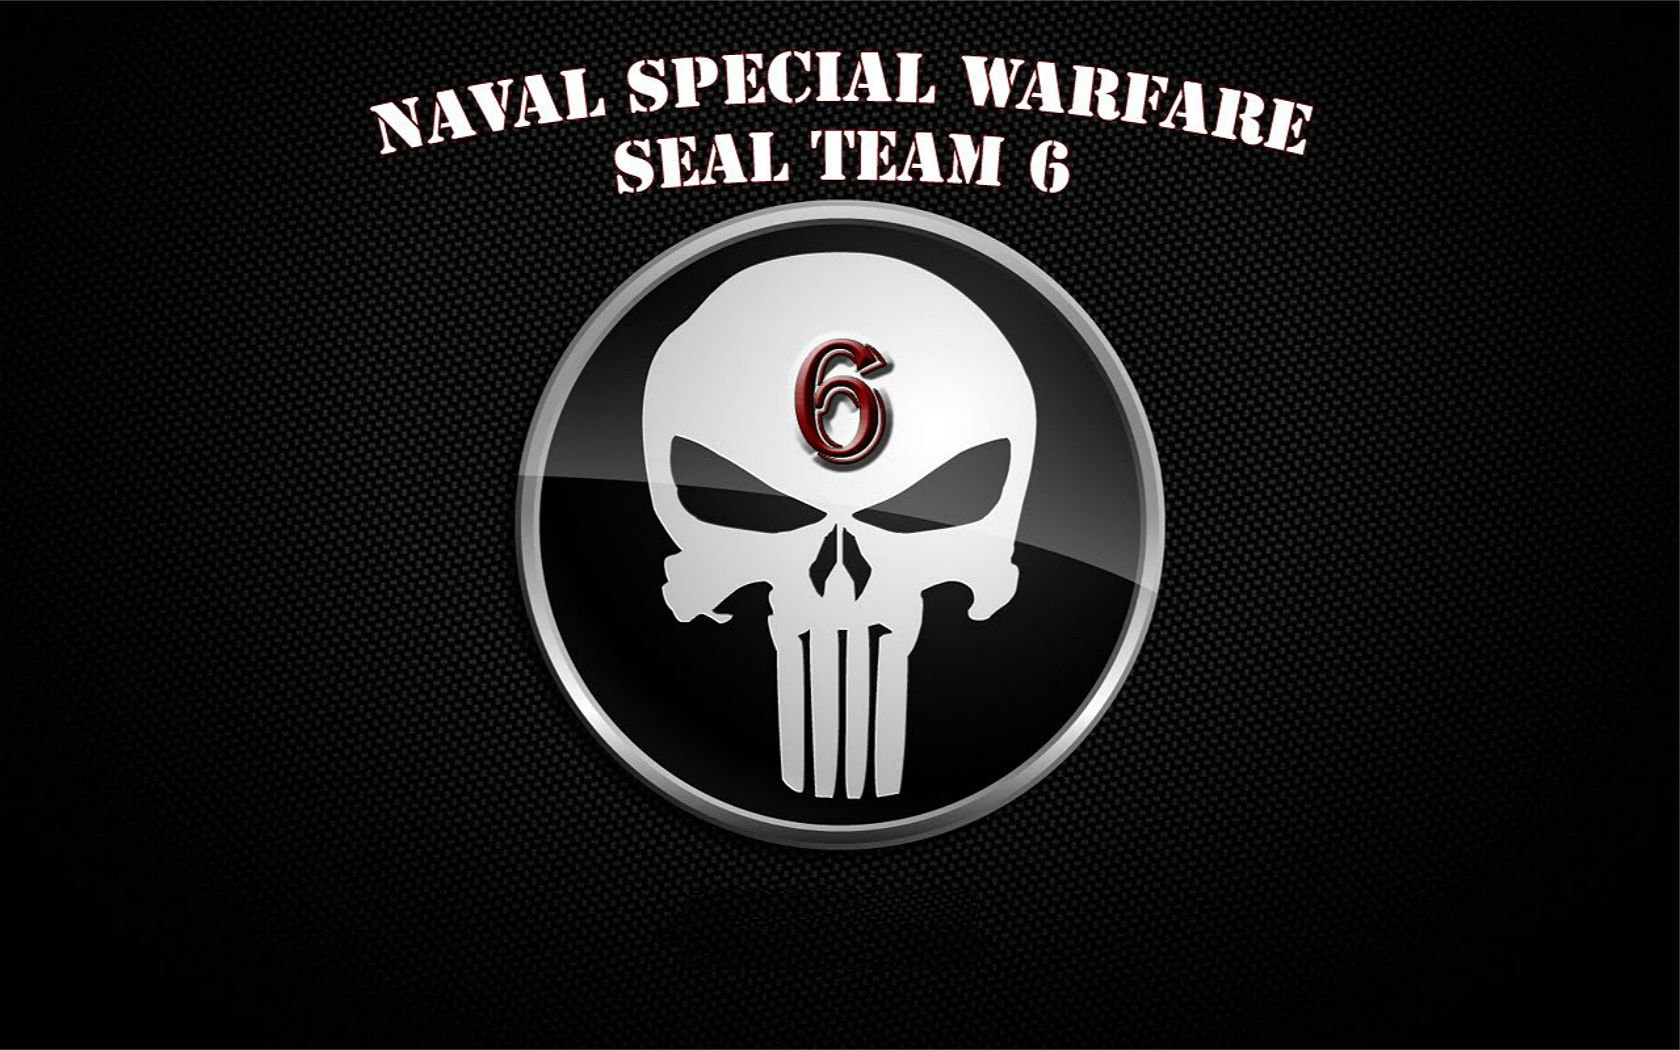 seal, Team, Military, Warrior, Soldier, Action, Fighting, Crime, Drama, Navy, 1stsix, Weapon, Rifle, Assault, Poster, Skull Wallpaper